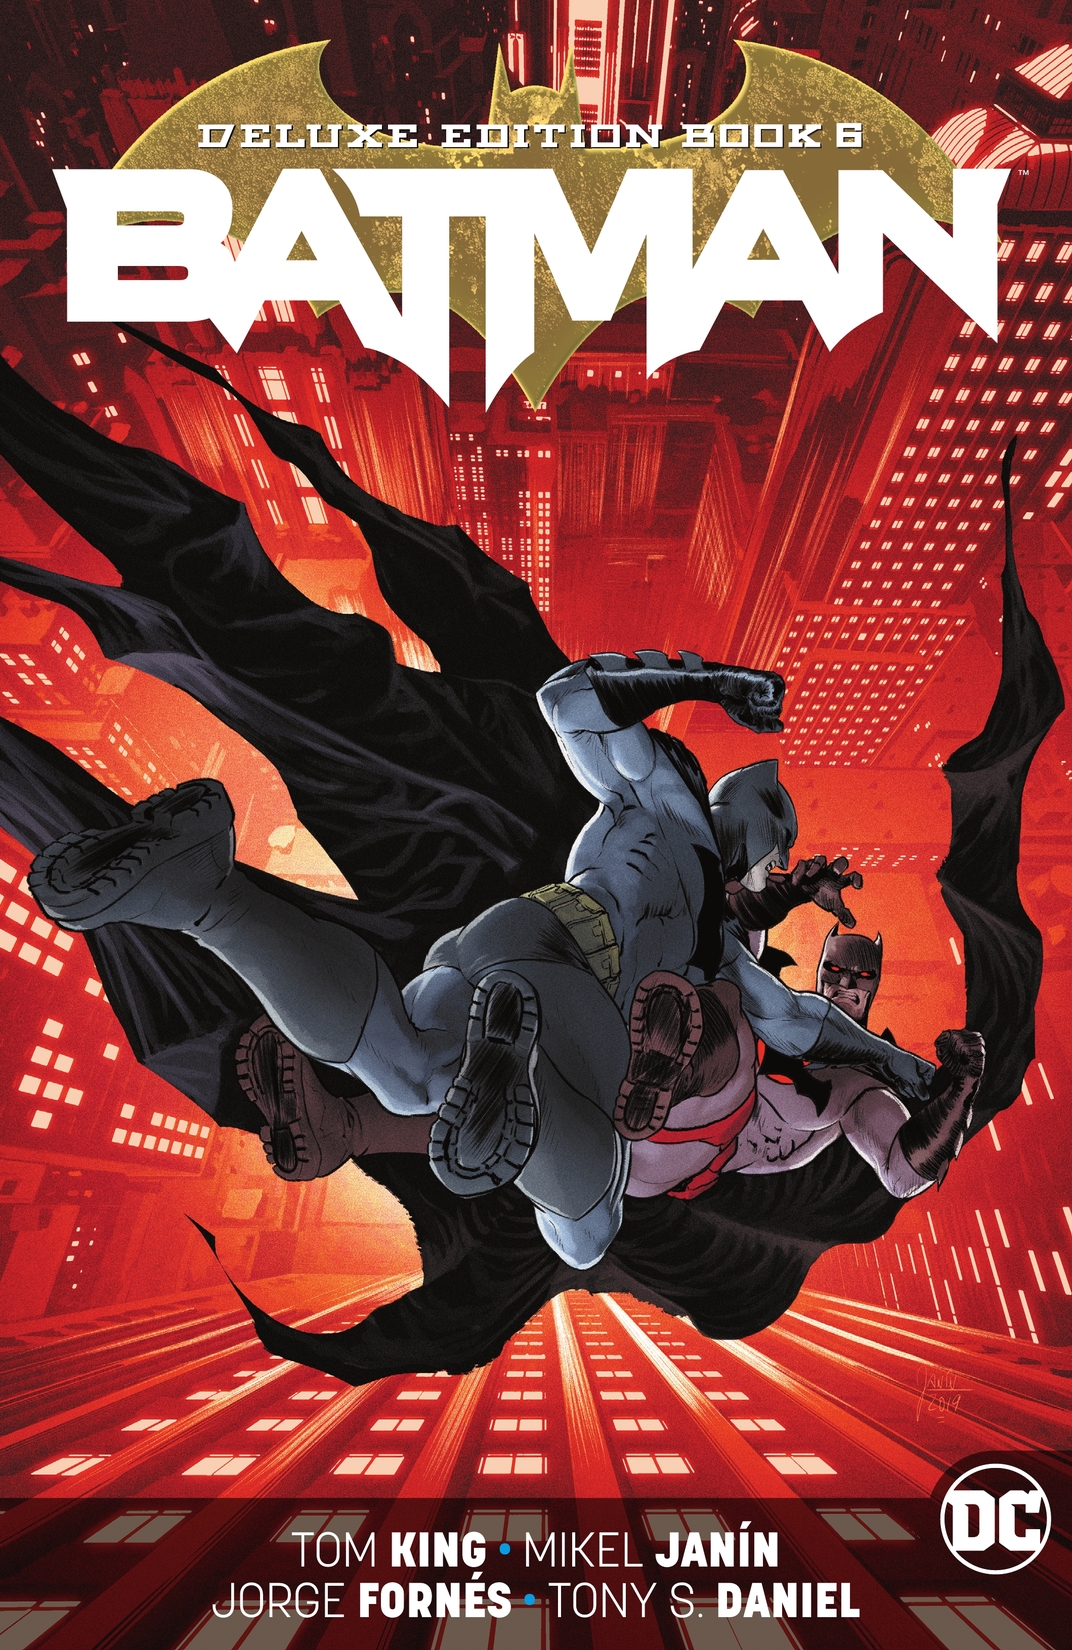 Batman: The Deluxe Edition Book 6 preview images